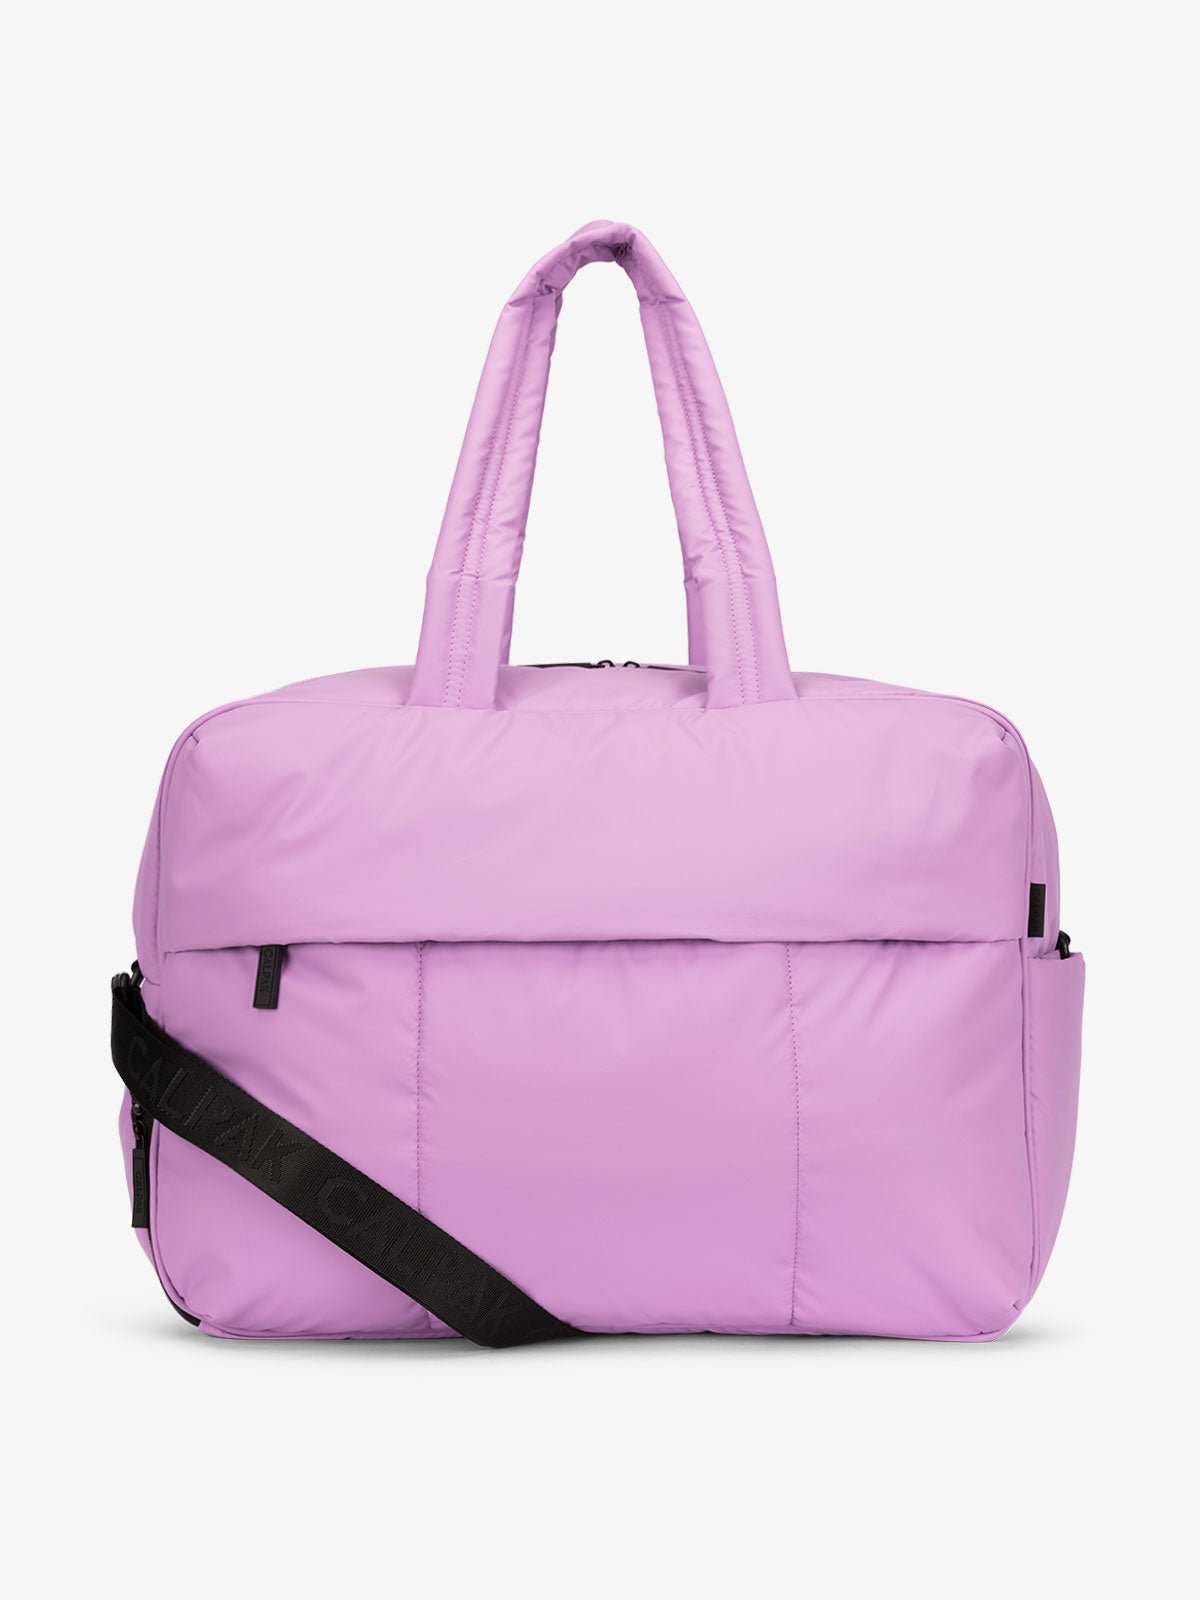 CALPAK Luka large duffle bag with detachable strap and zippered front pocket in lavender lilac